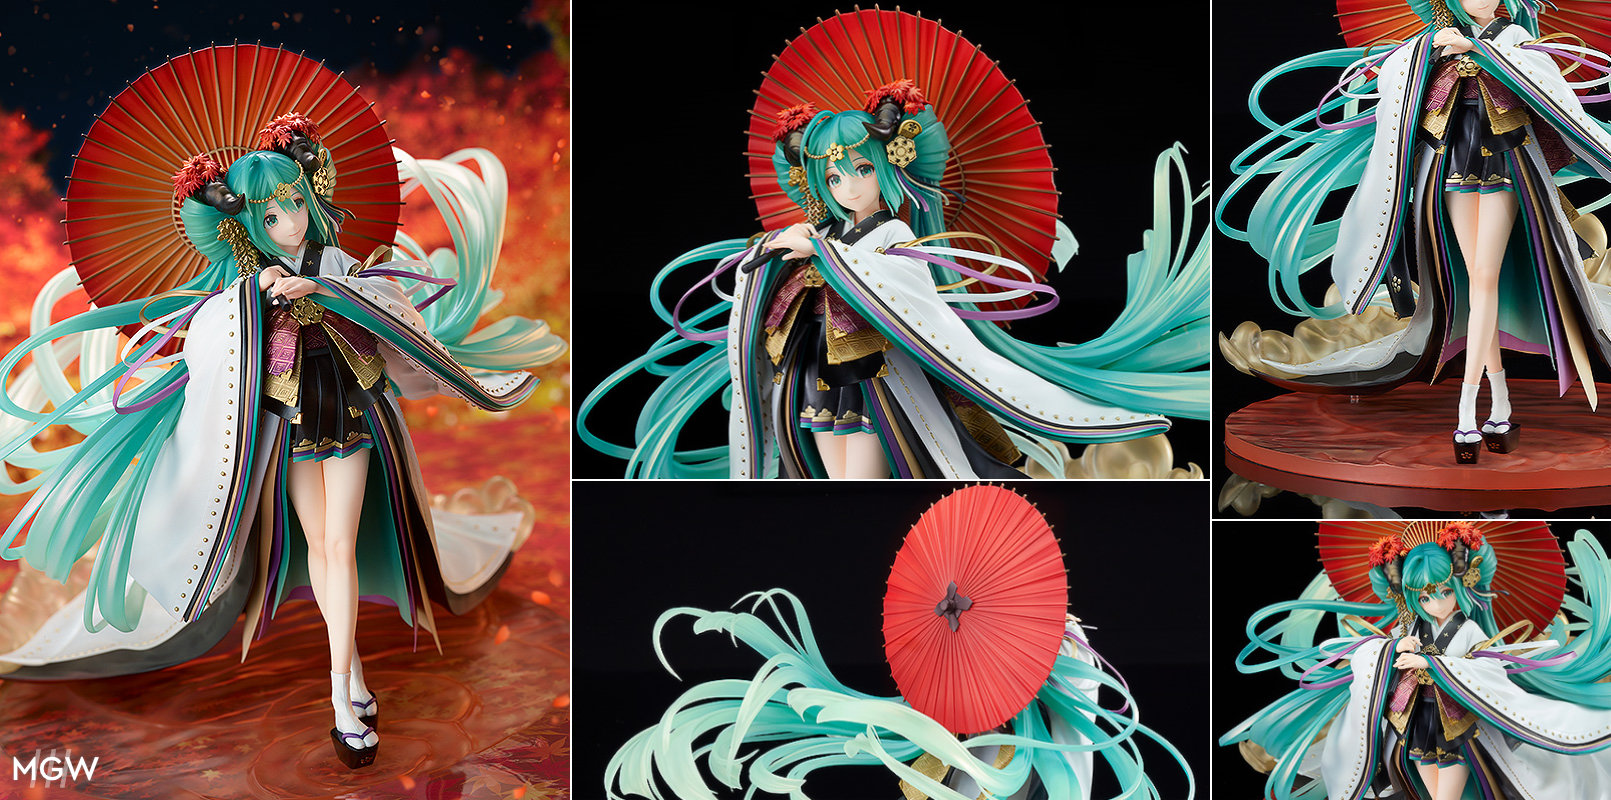 Hatsune Miku Land of the Eternal by Good Smile Company with artwork by Rella